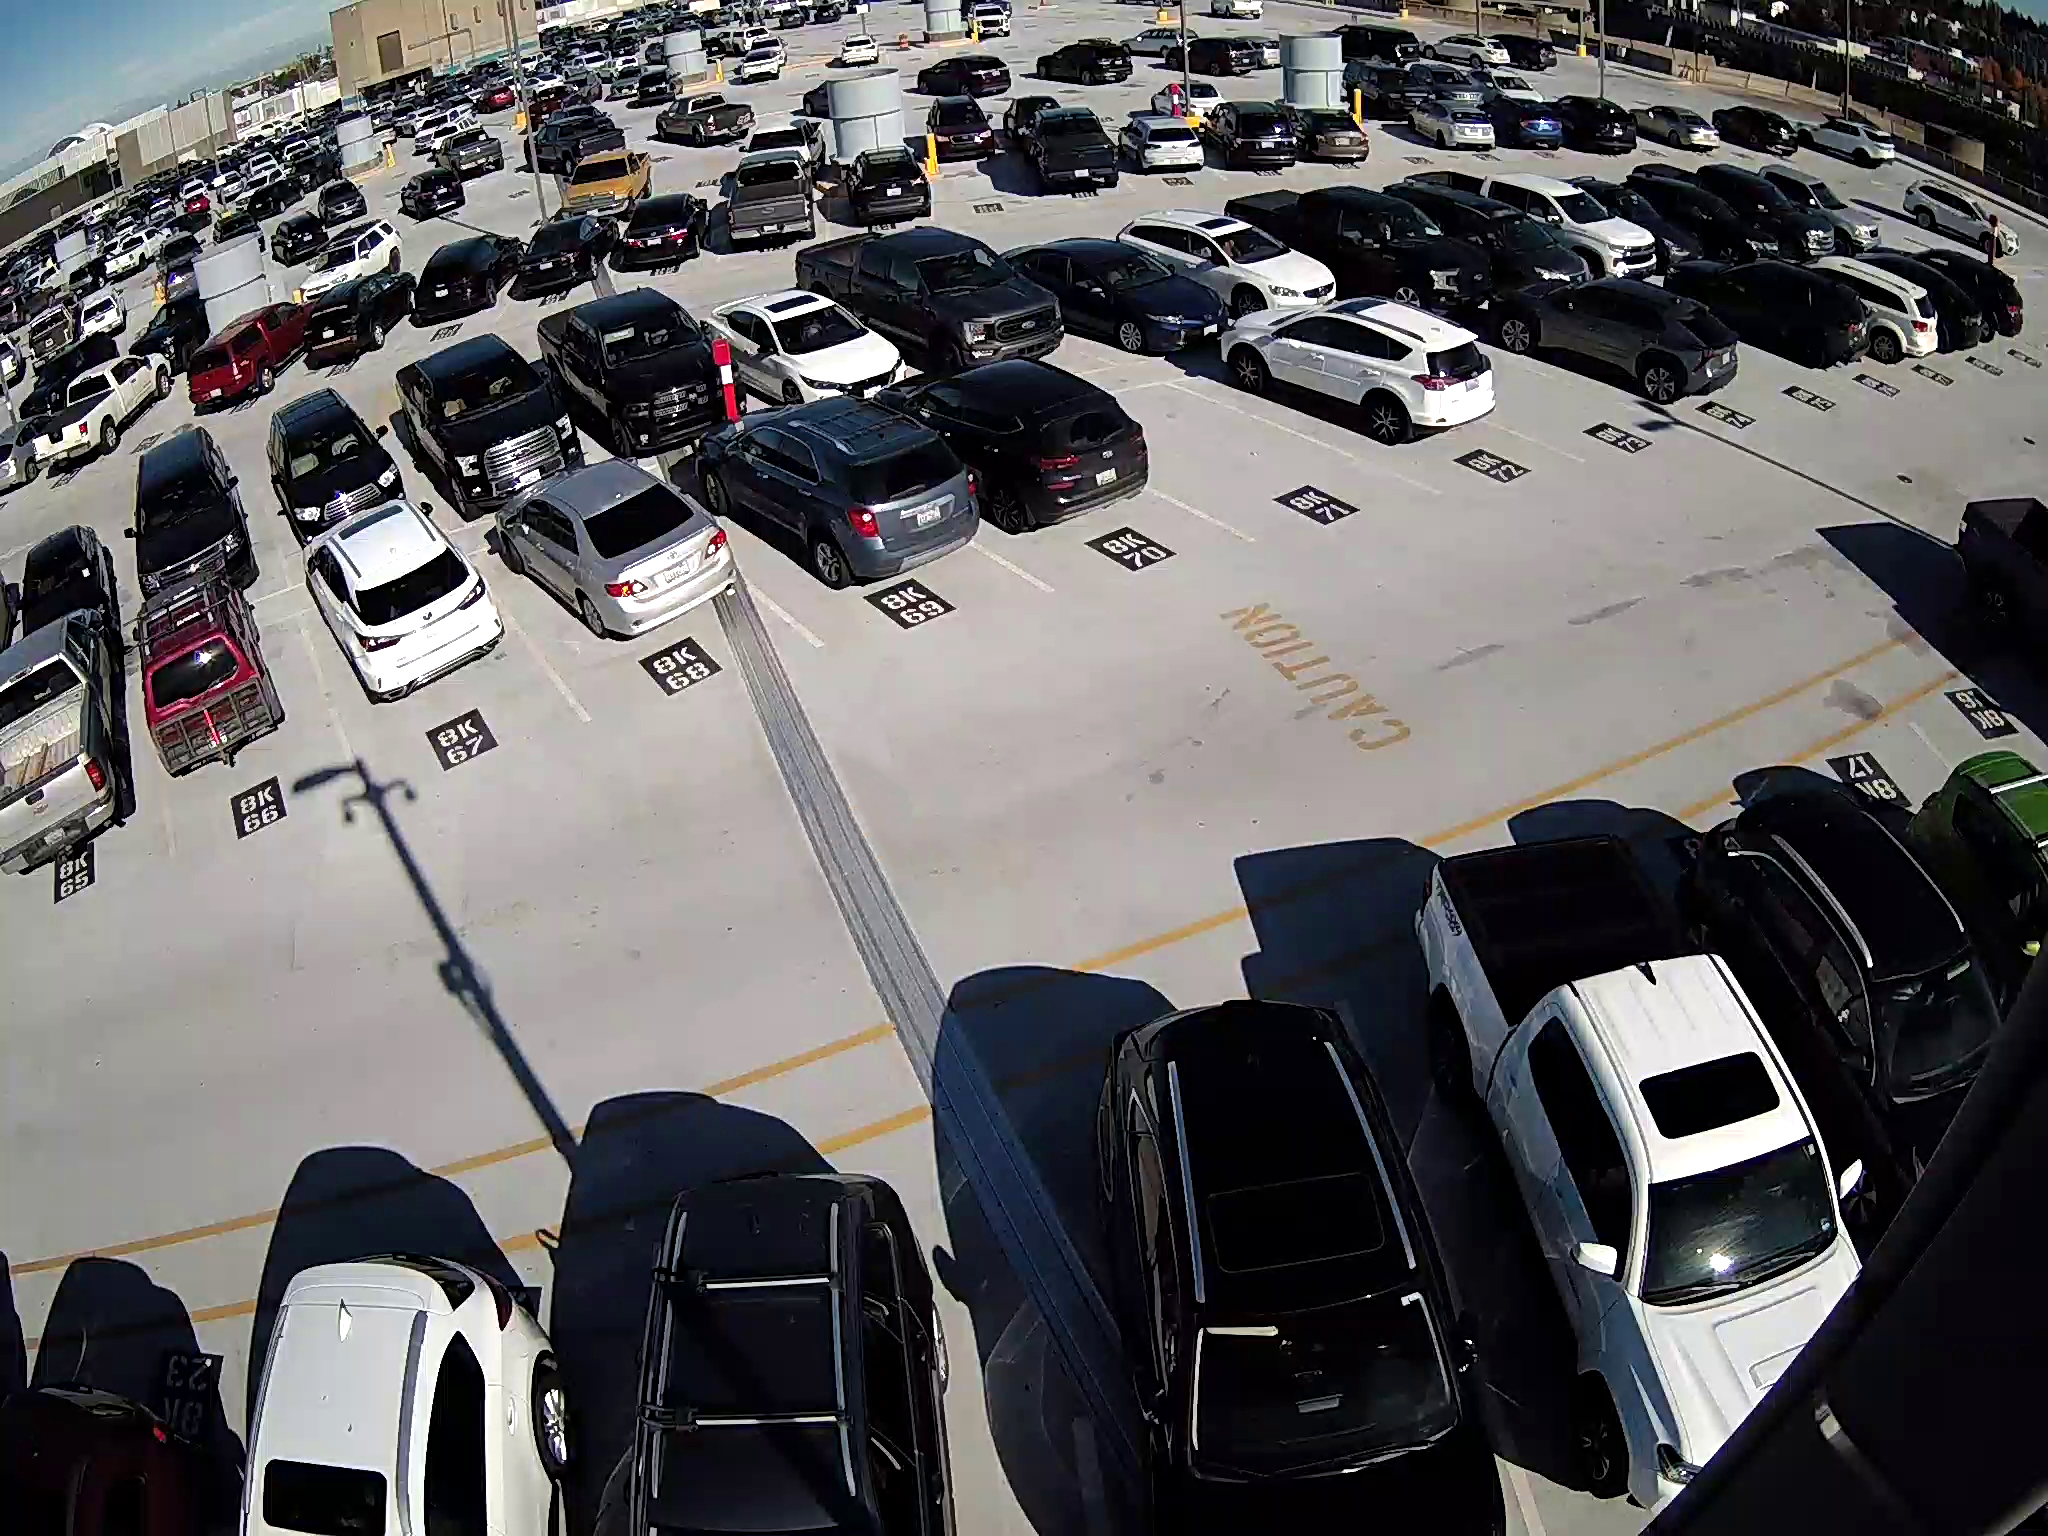 S2 Smart Sensing Solution video feed showcasing outdoor parking guidance solution